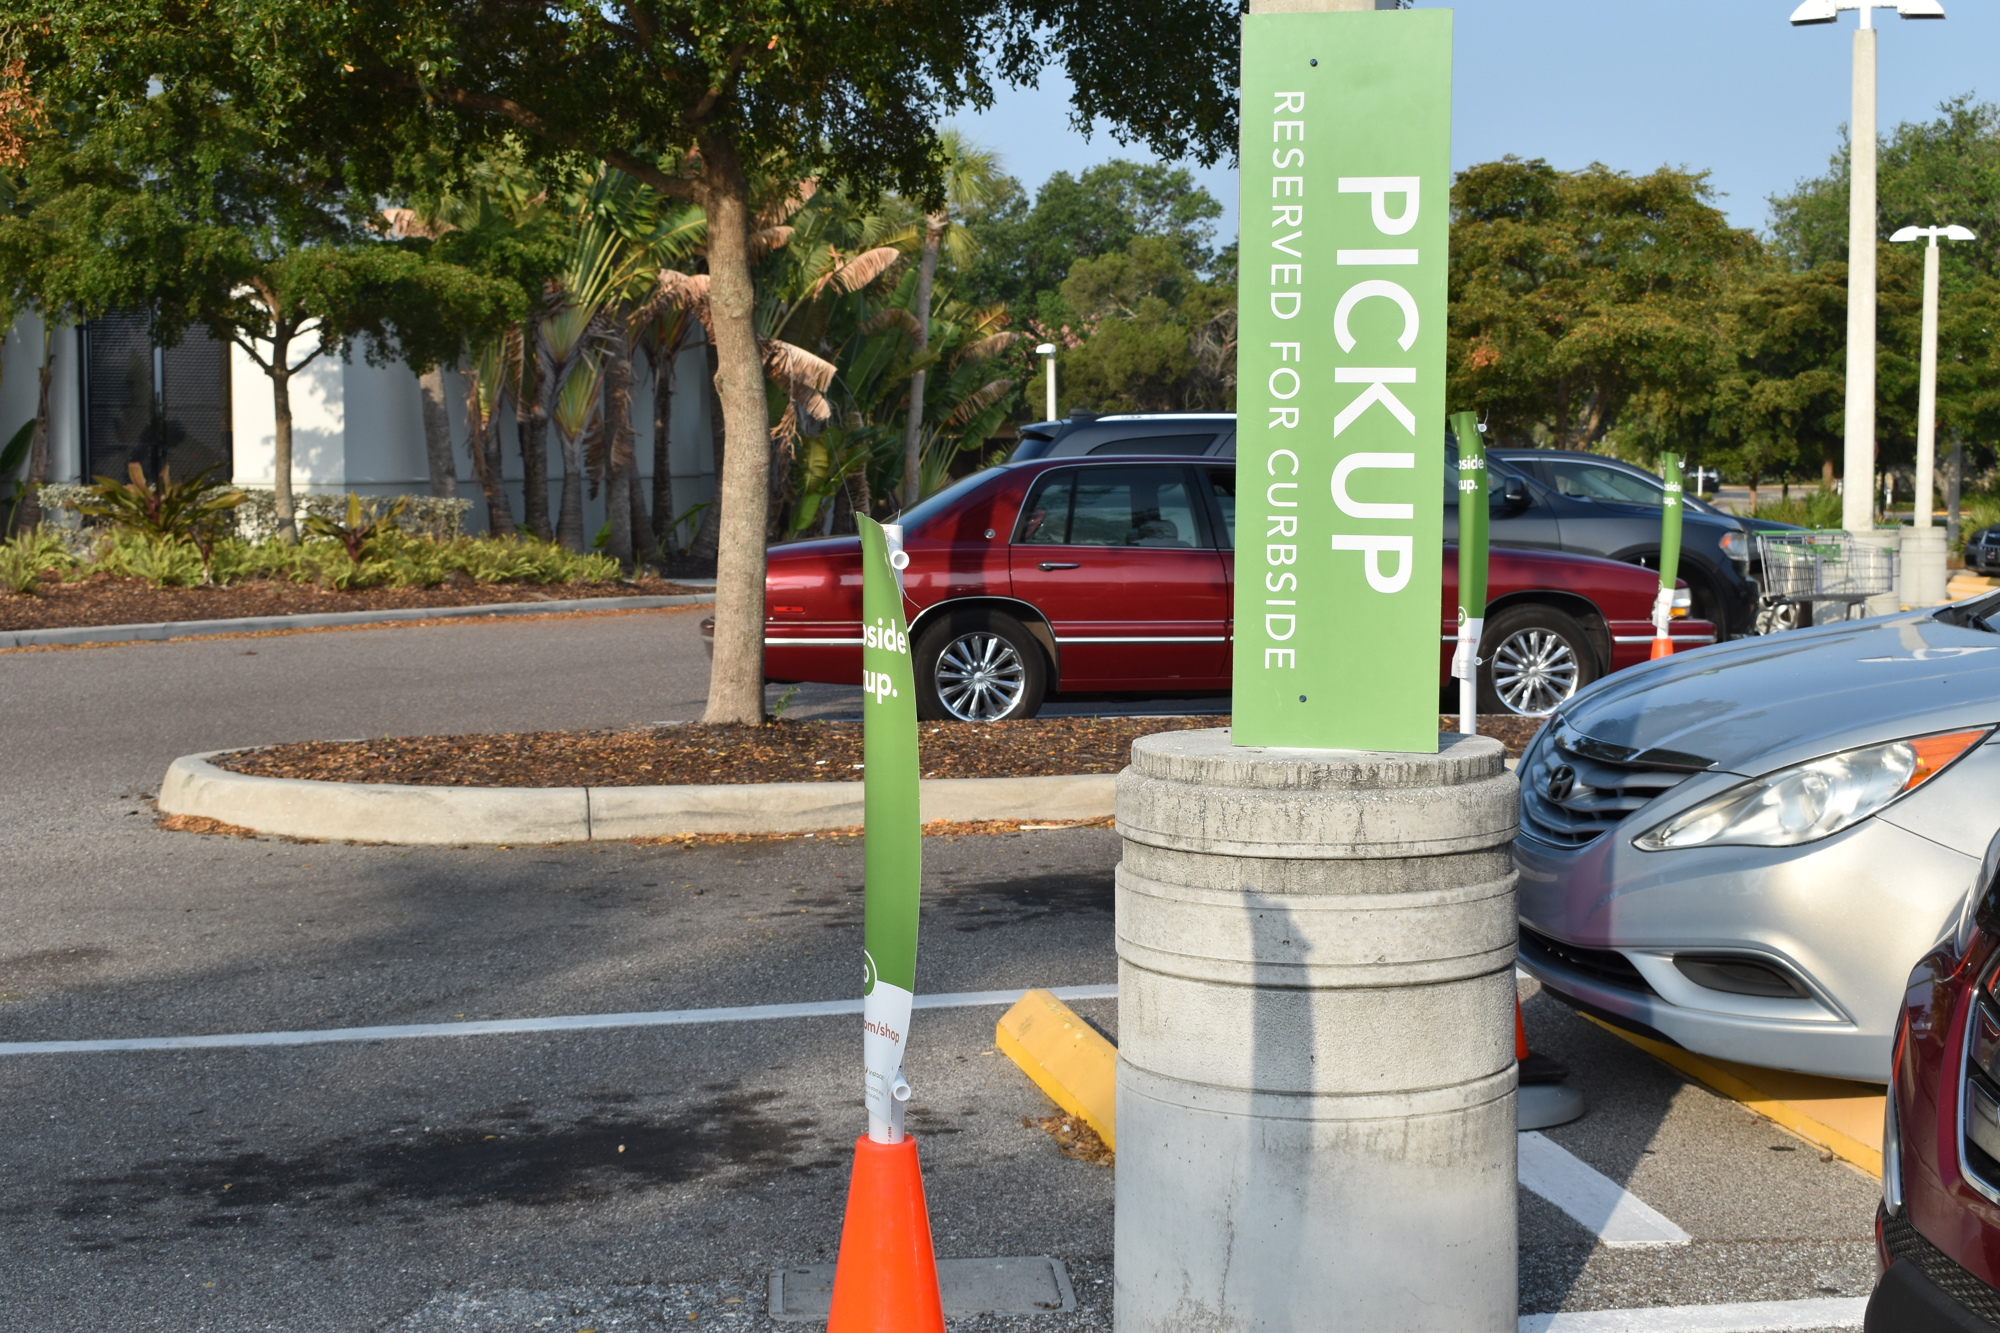 Longboat Key's Publix store launched curbside pickup in April 2020.